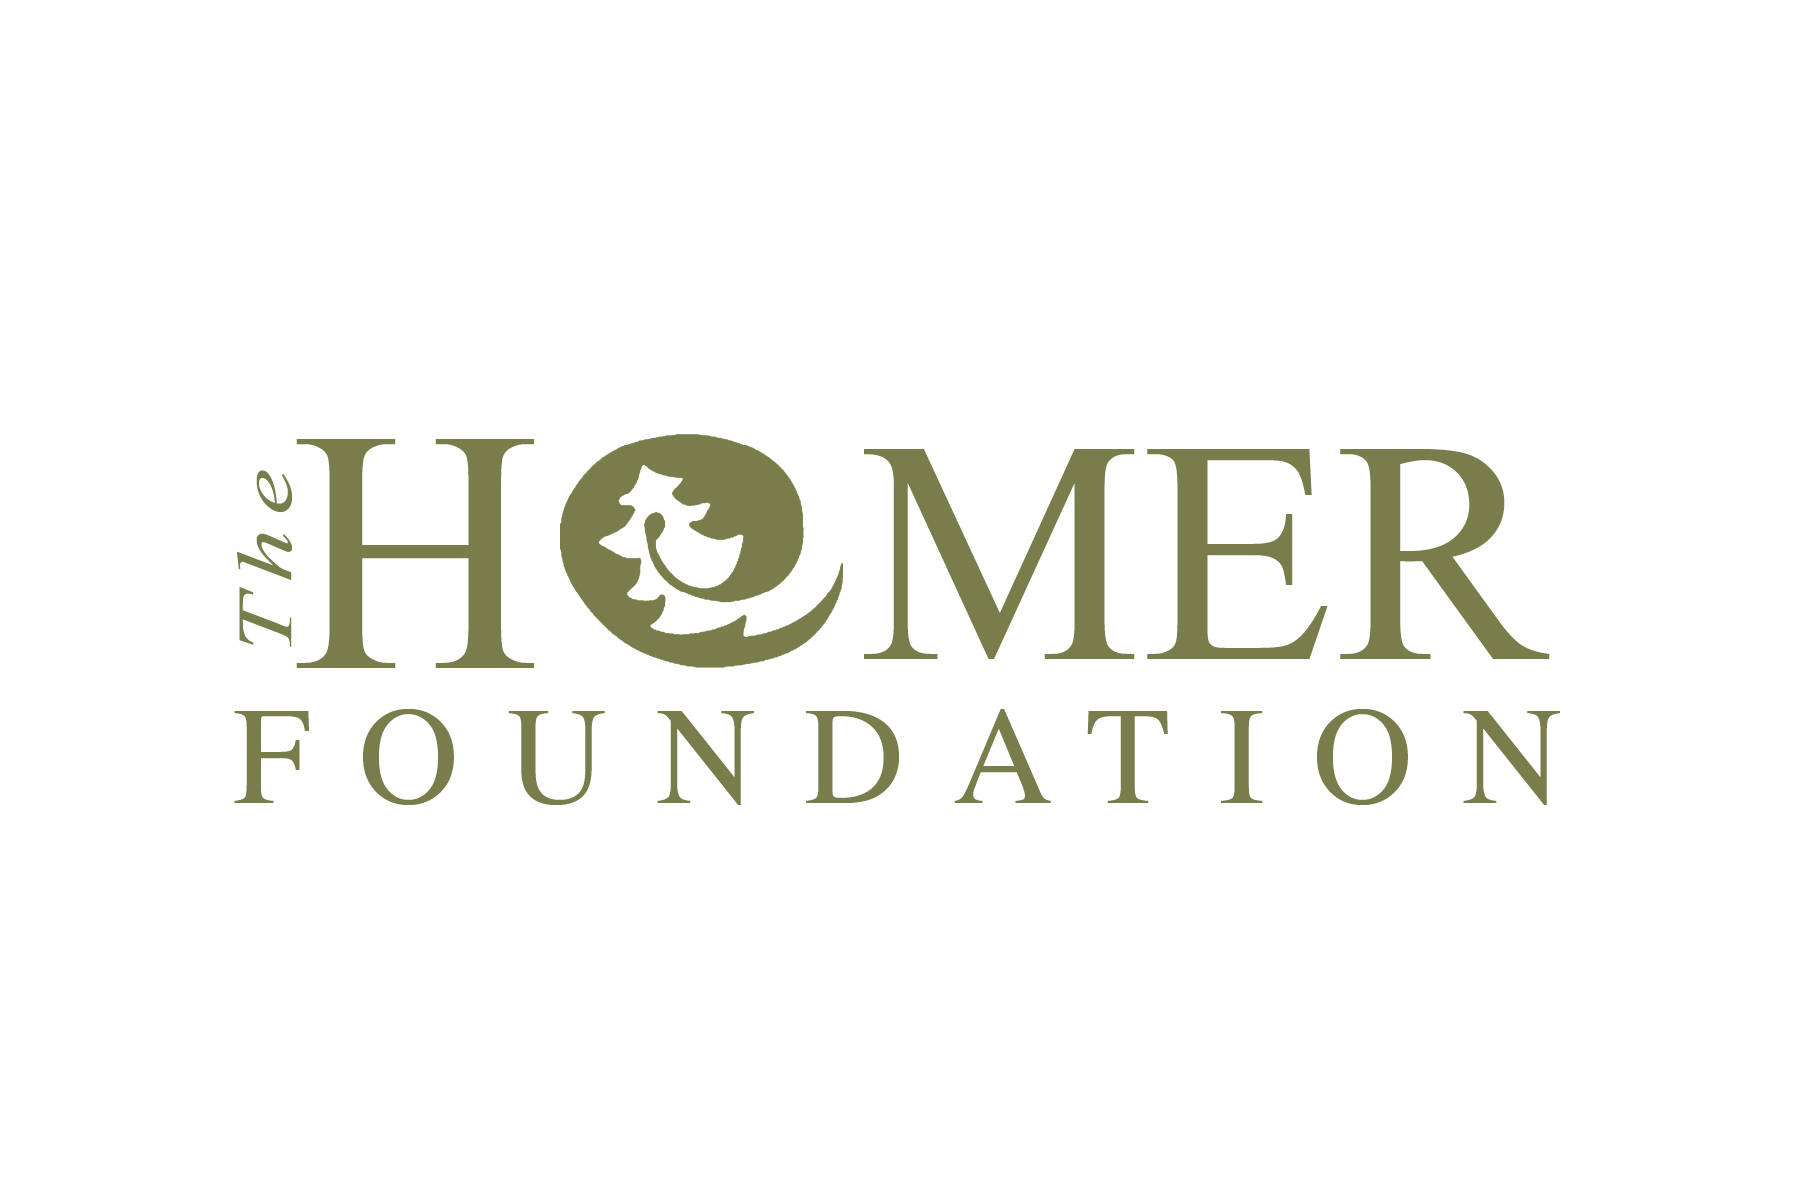 The logo of the Homer Foundation.